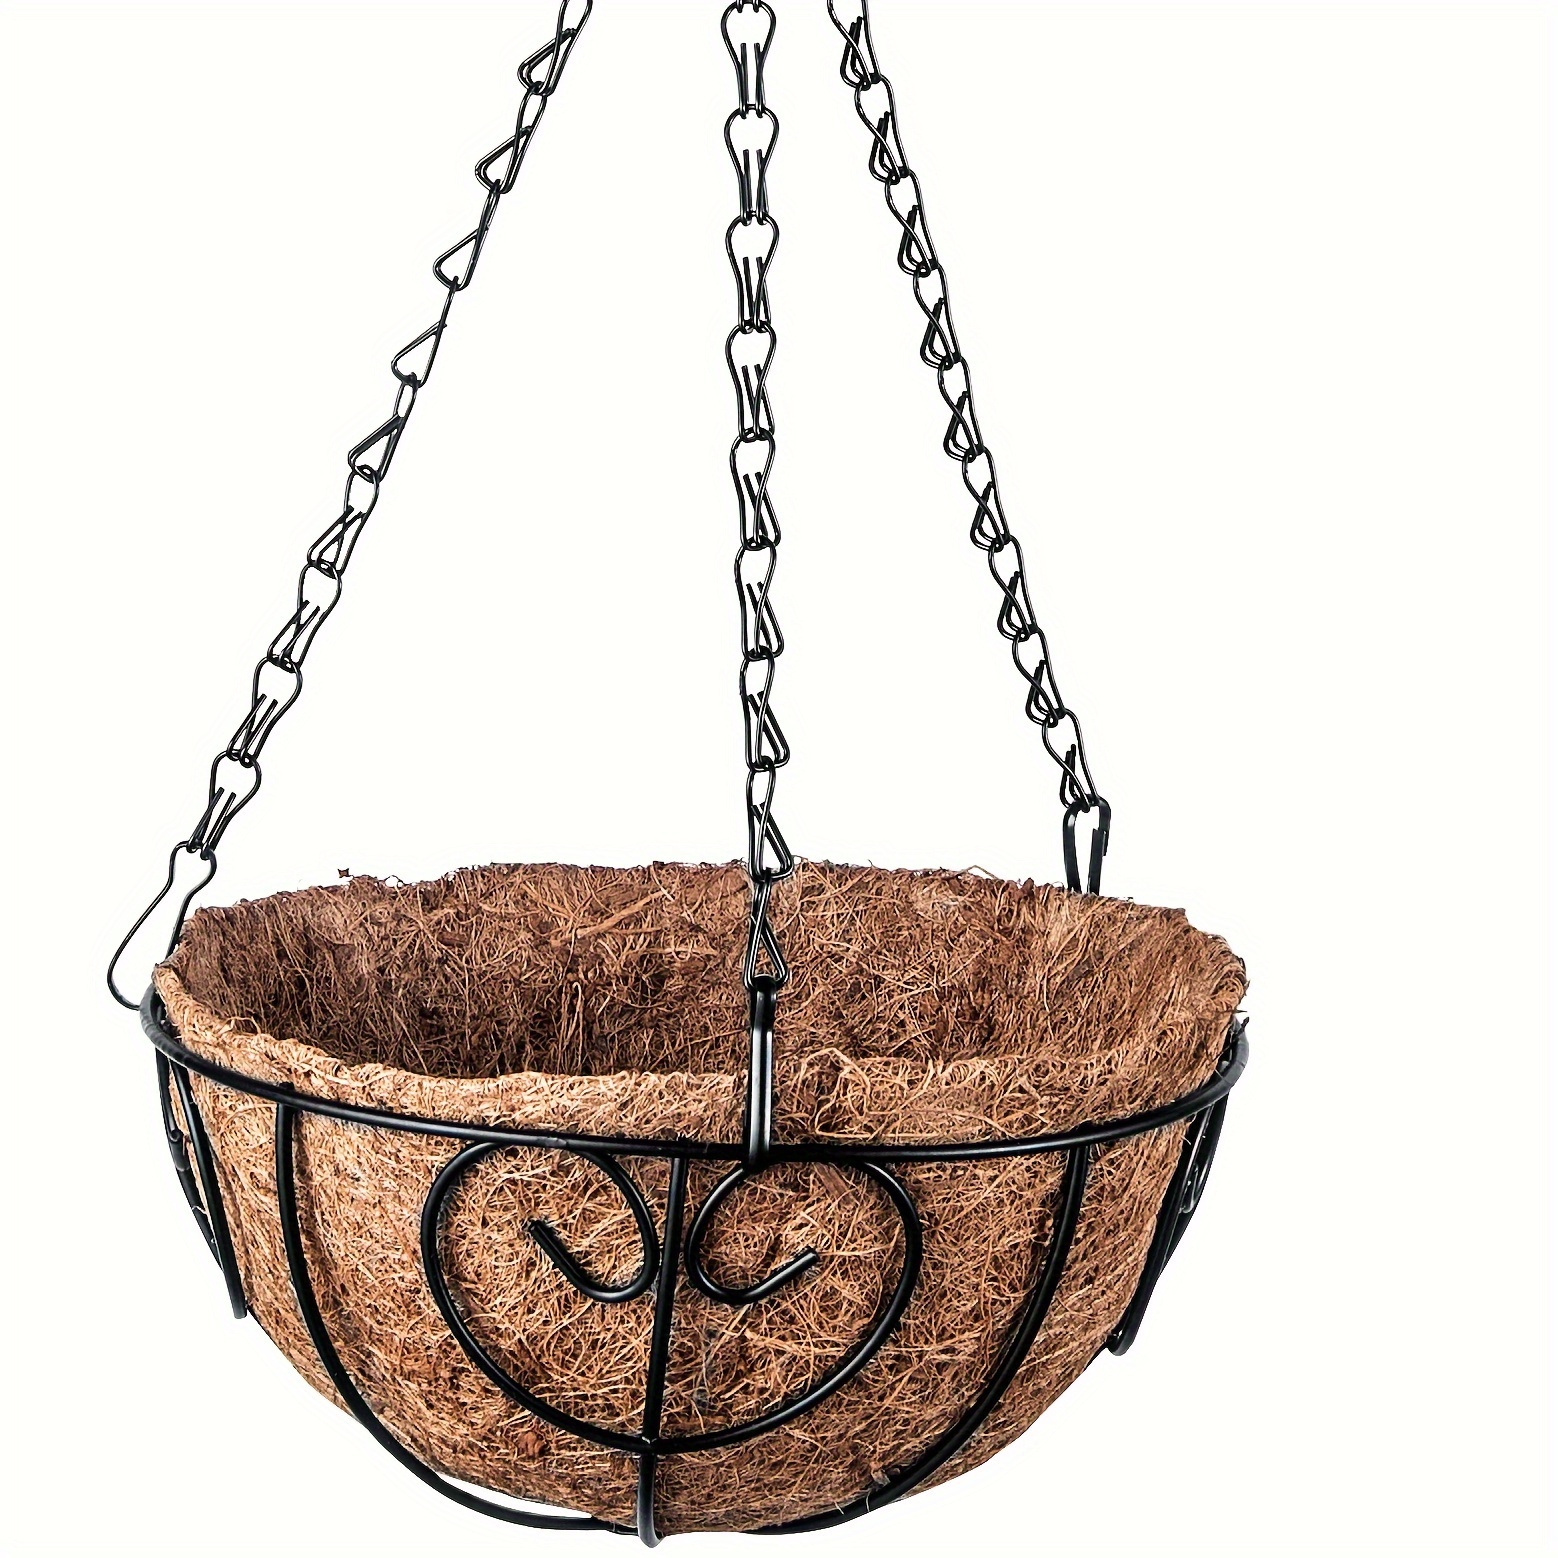 

1 Pack, 8 Inch, Metal Hanging Baskets For Plants Outdoor Round Metal Wire Hanging Basket Planter With Coco Fiber Liners Chain Round Wire Plant Holder For Garden, Patio, Deck, Porch Plants Flower Potss